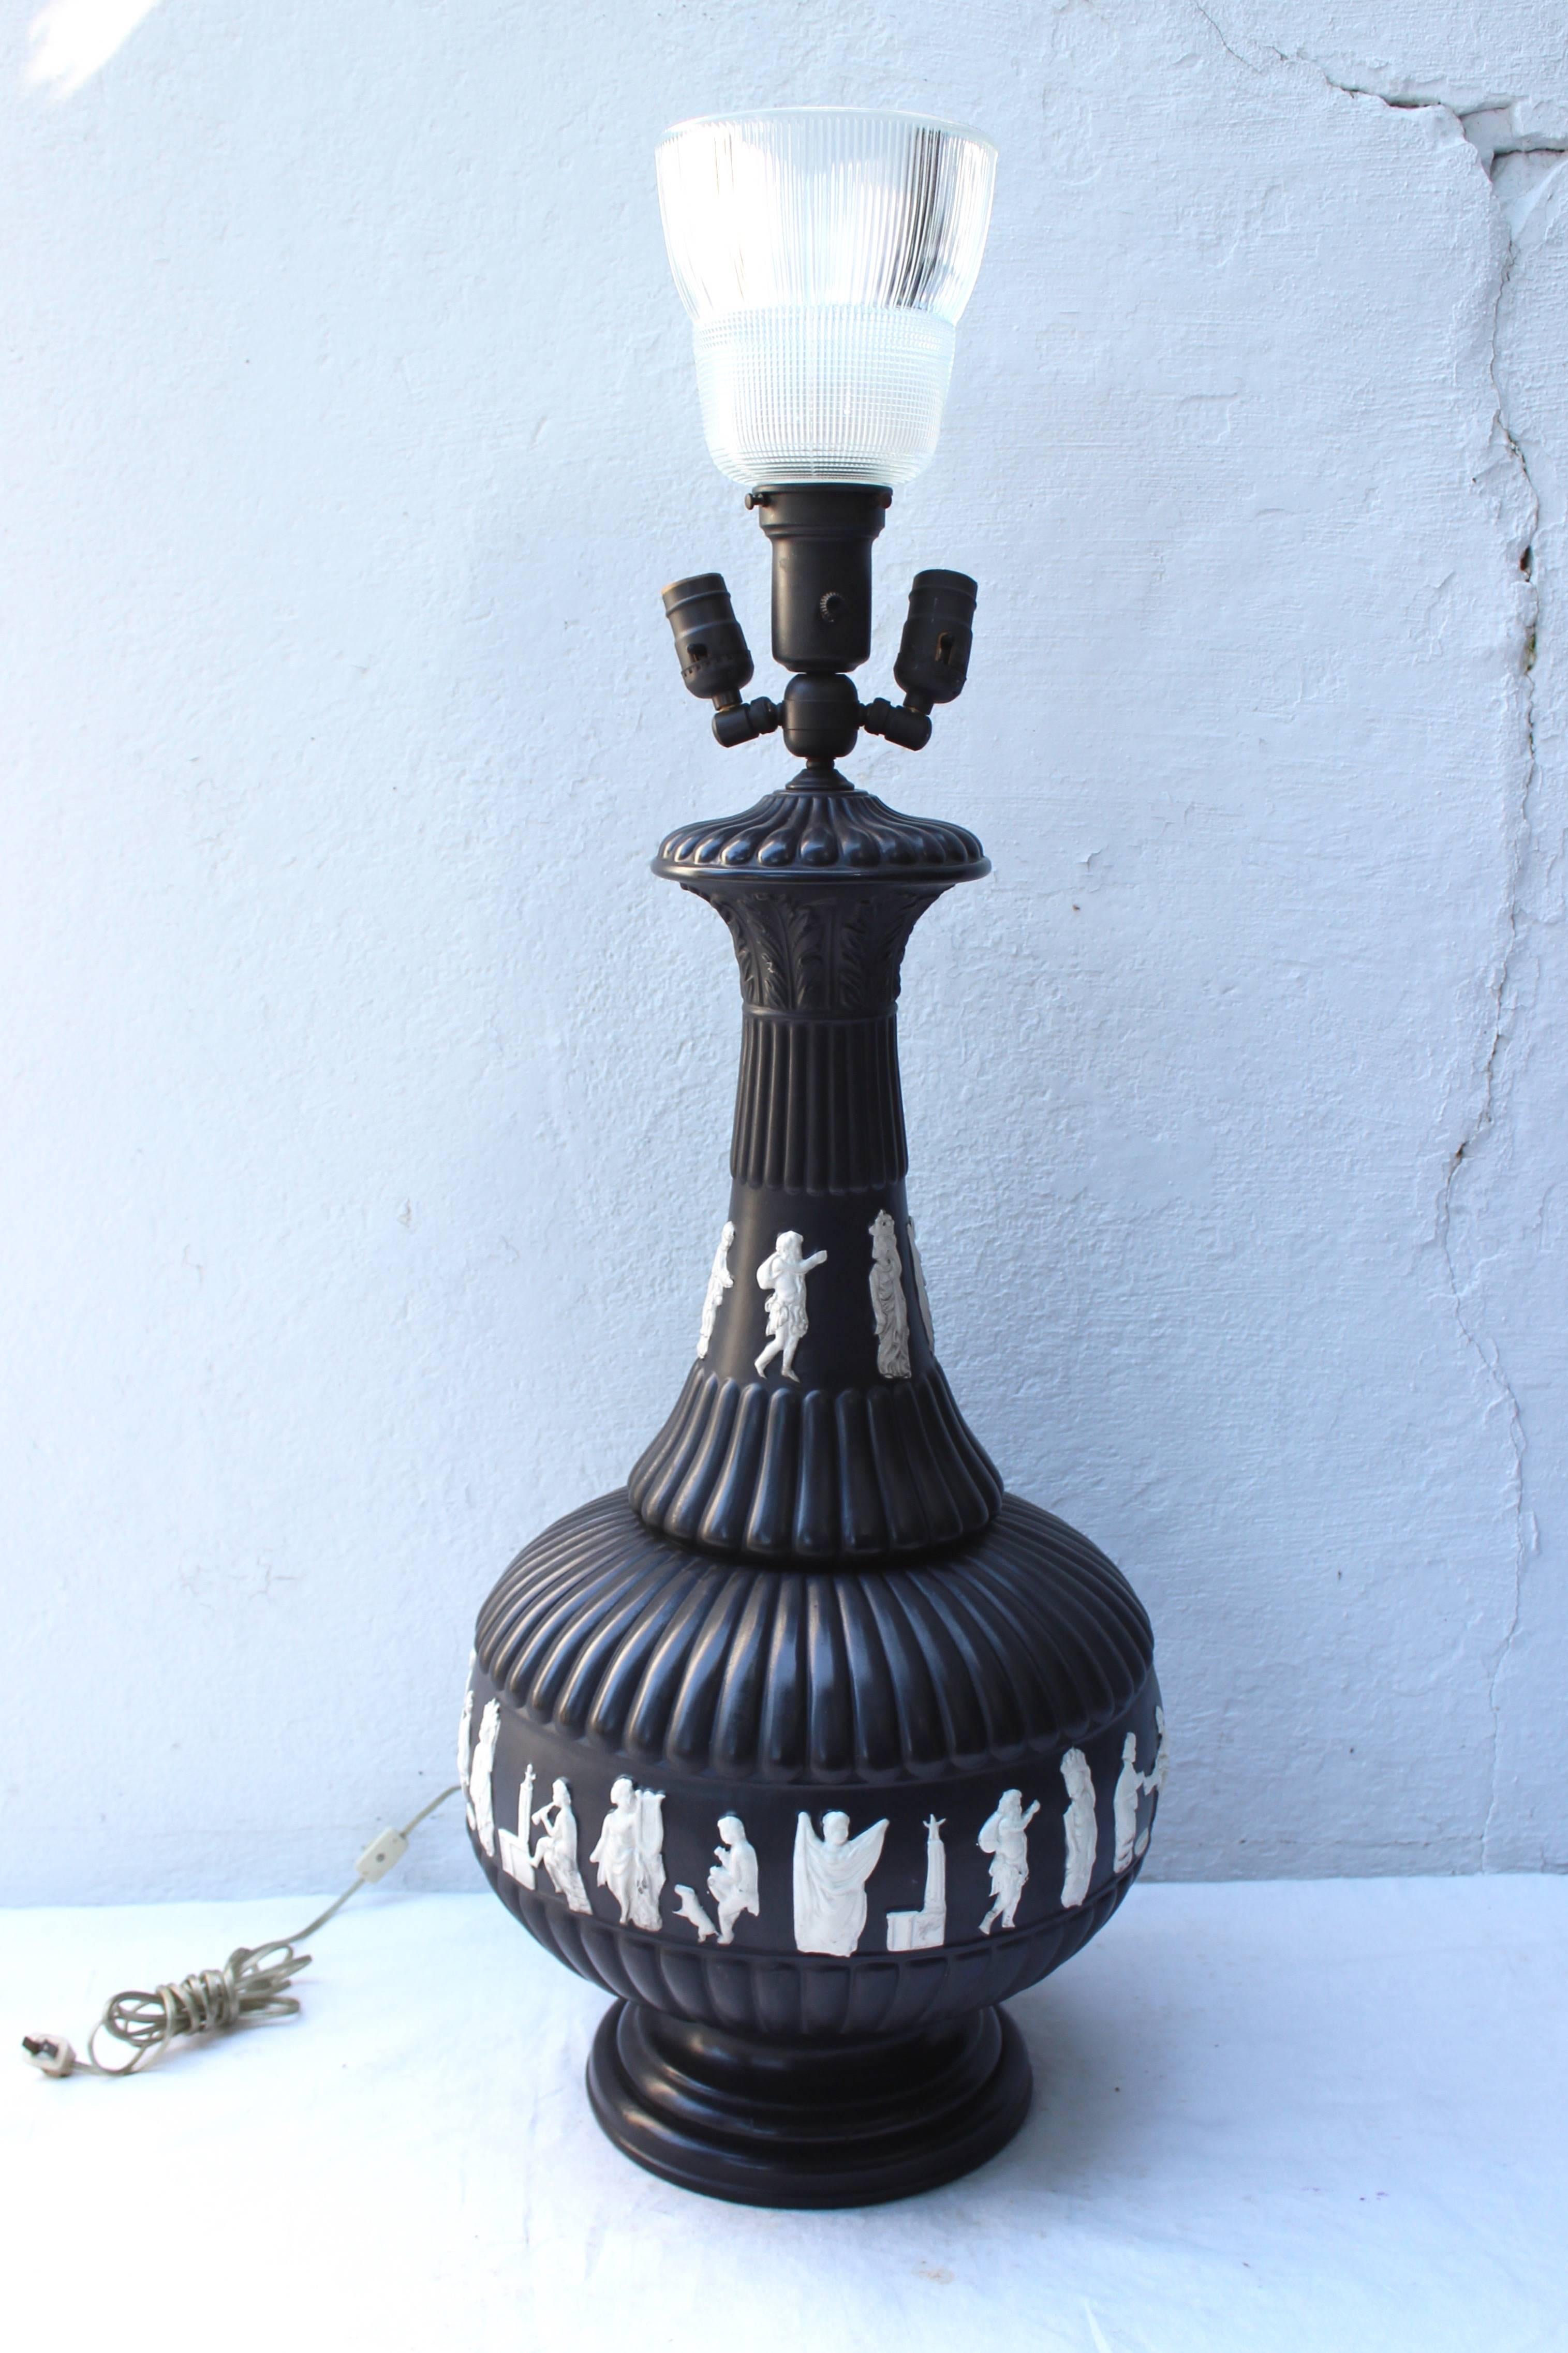 large-scale Wedgwood style lamp with white figures.